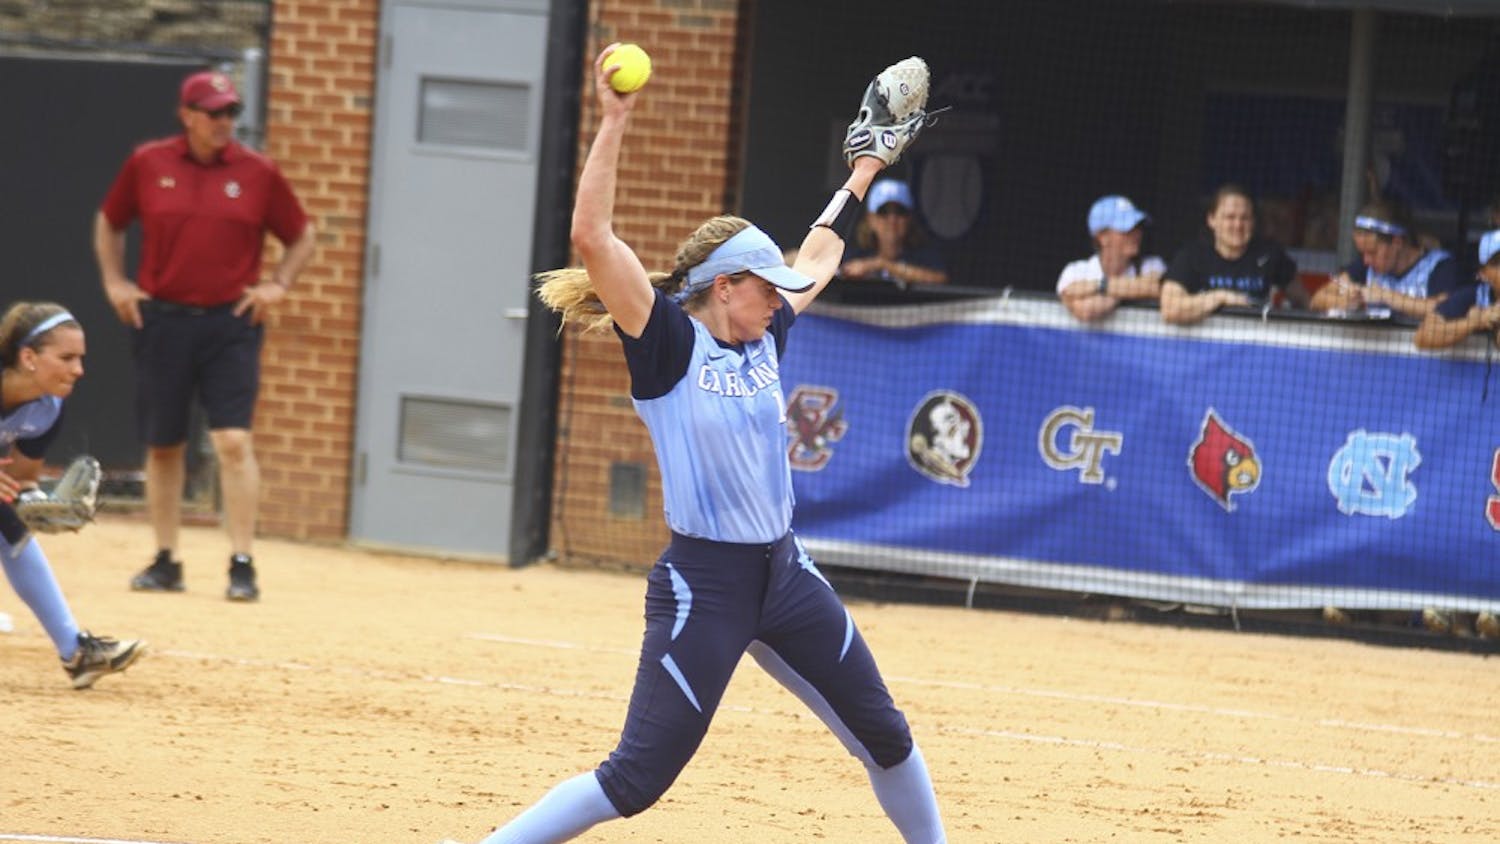 Junior Kendra Lynch pitches in the ACC Softball Tournament held in Raleigh on Thursday 